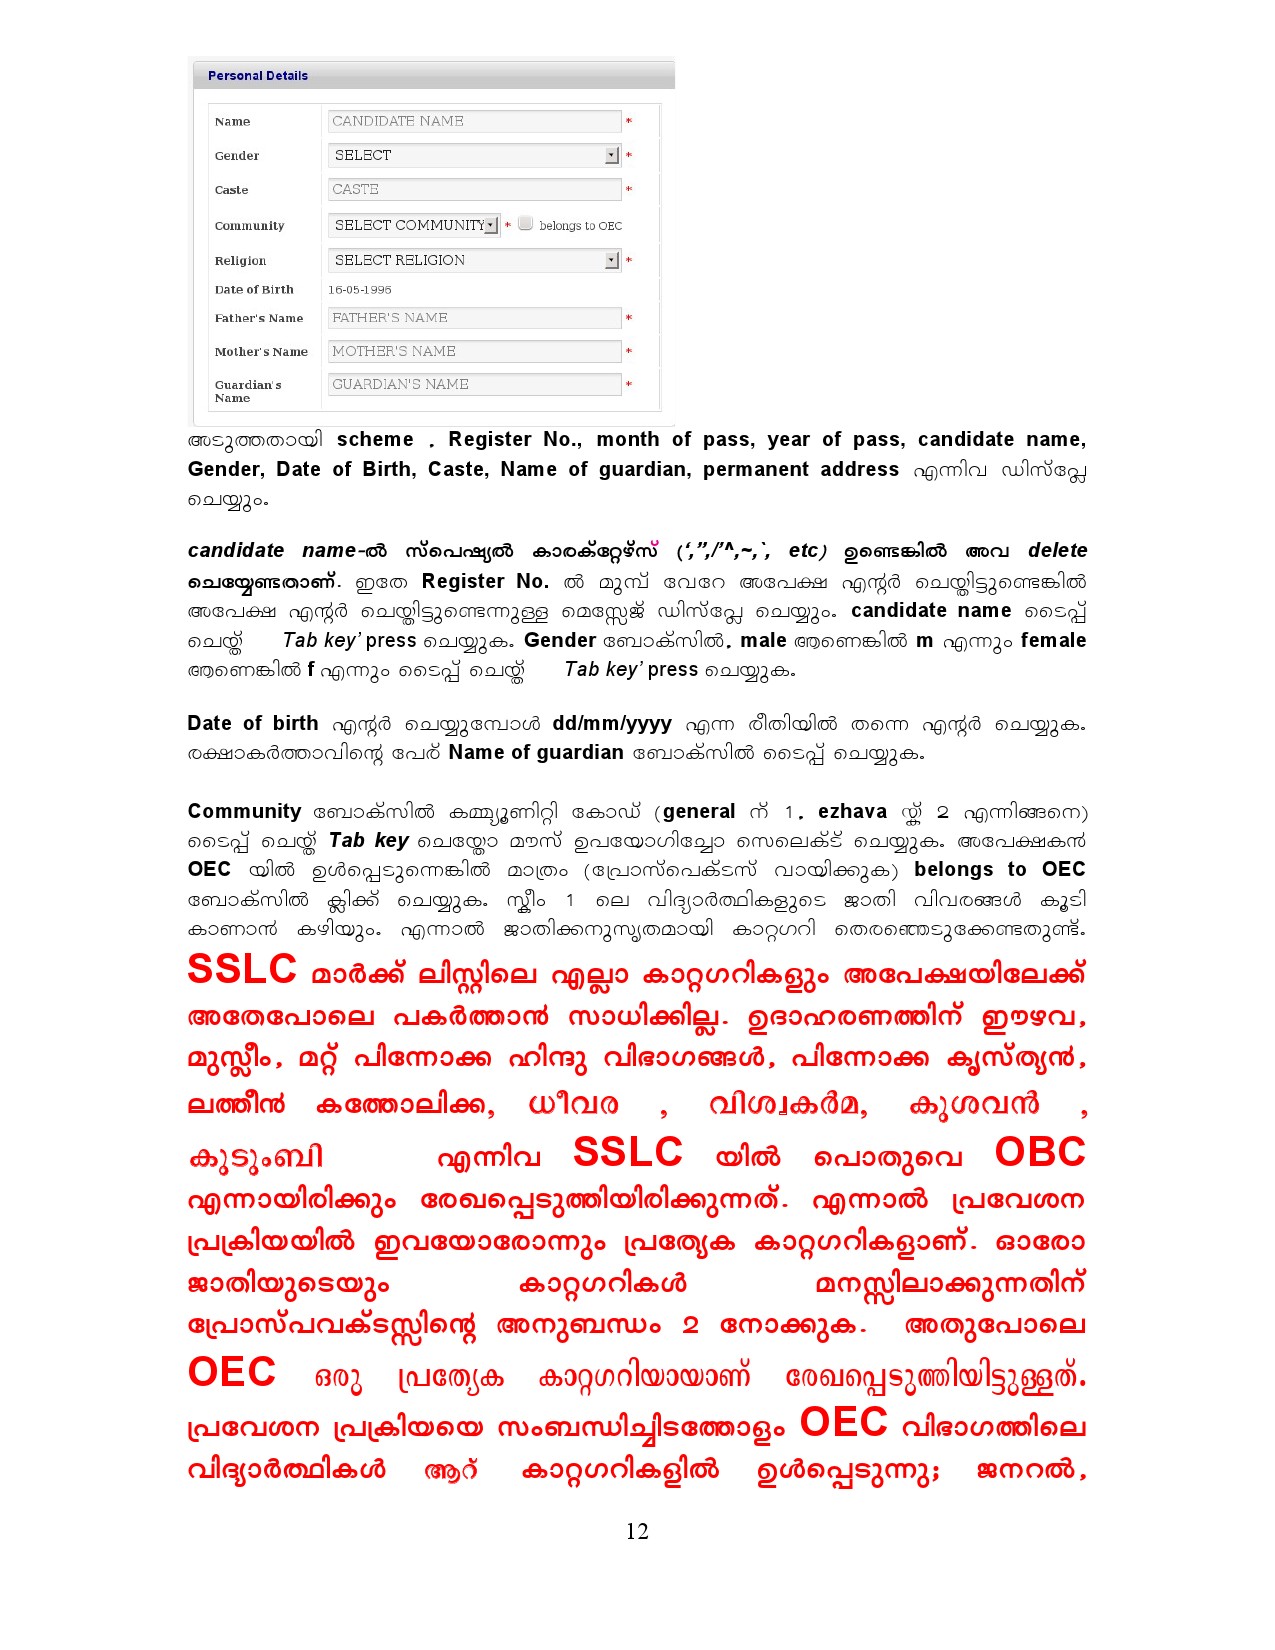 Higher Secondary School Online Application Manual in Malayalam - Notification Image 12